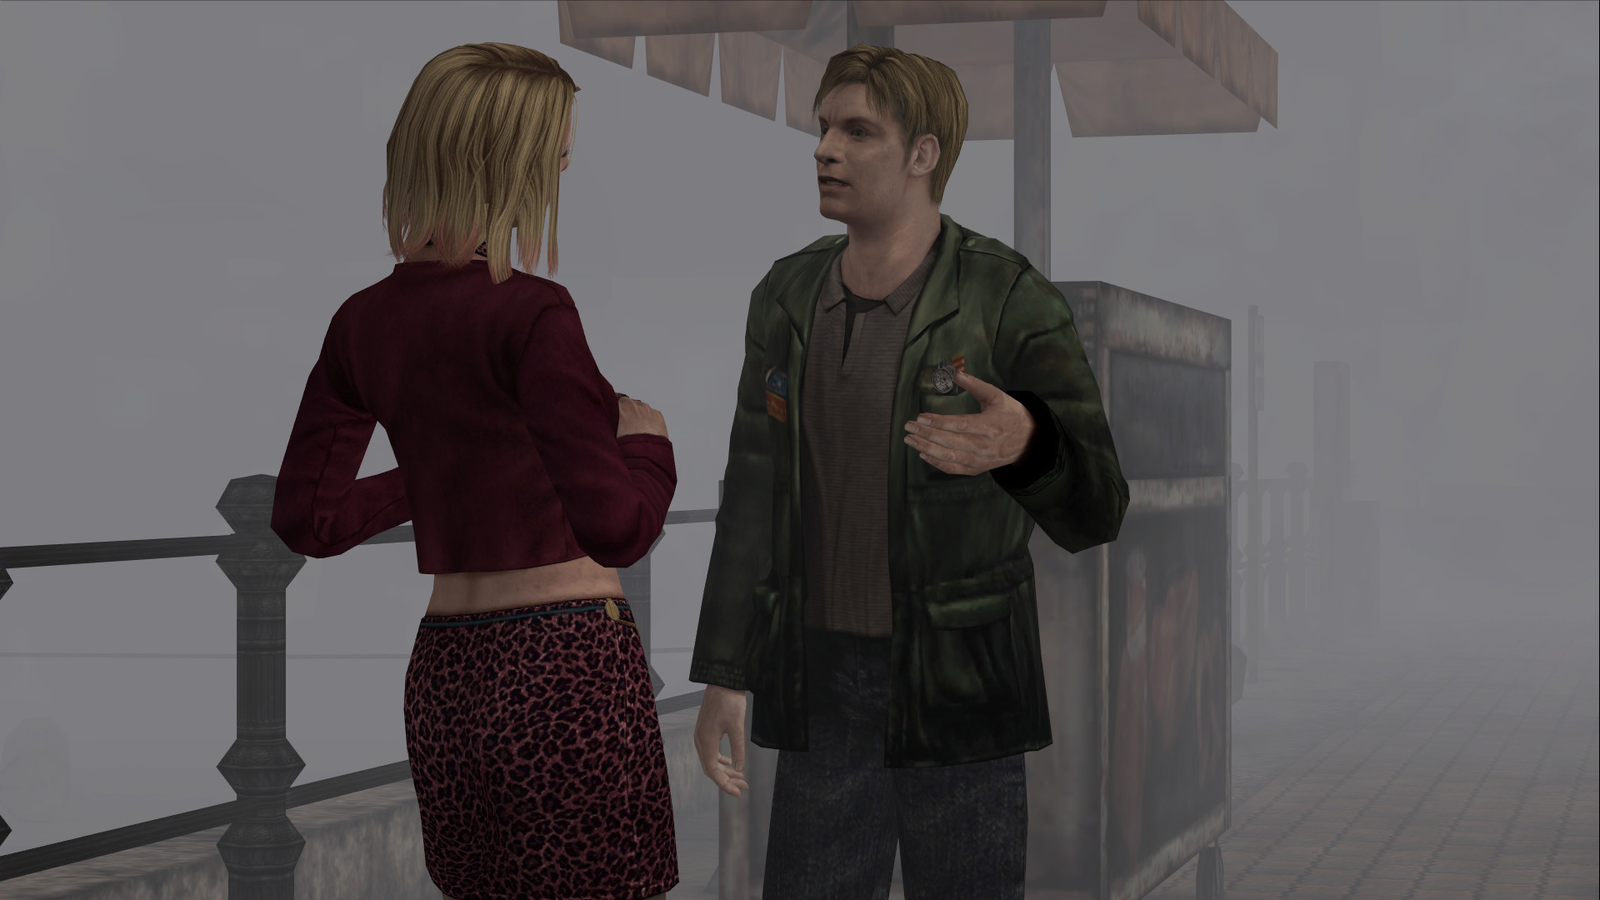 Film Thoughts: VIDEO GAME MOVIE MONTH: Silent Hill (2006)